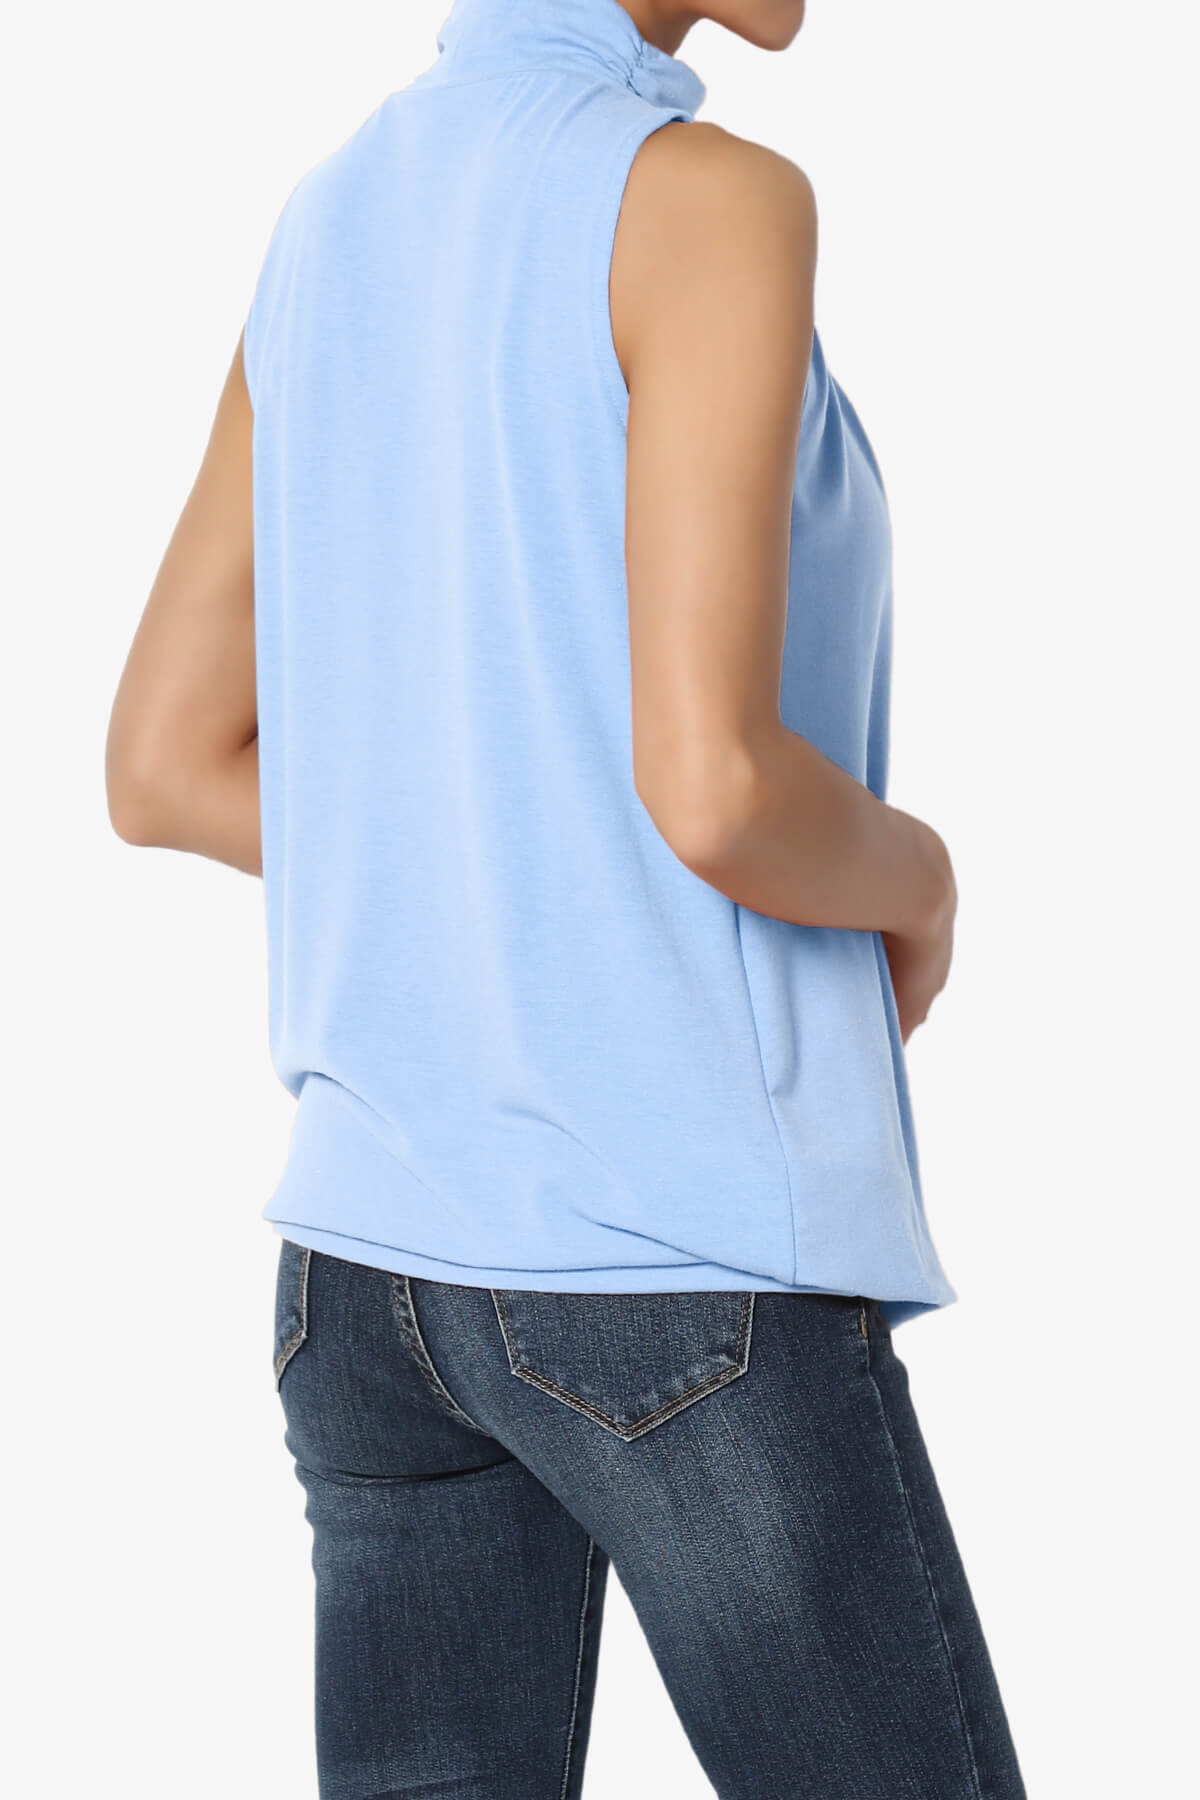 Load image into Gallery viewer, Jibbitz Sleeveless Mock Neck Pleated Top LIGHT BLUE_4
